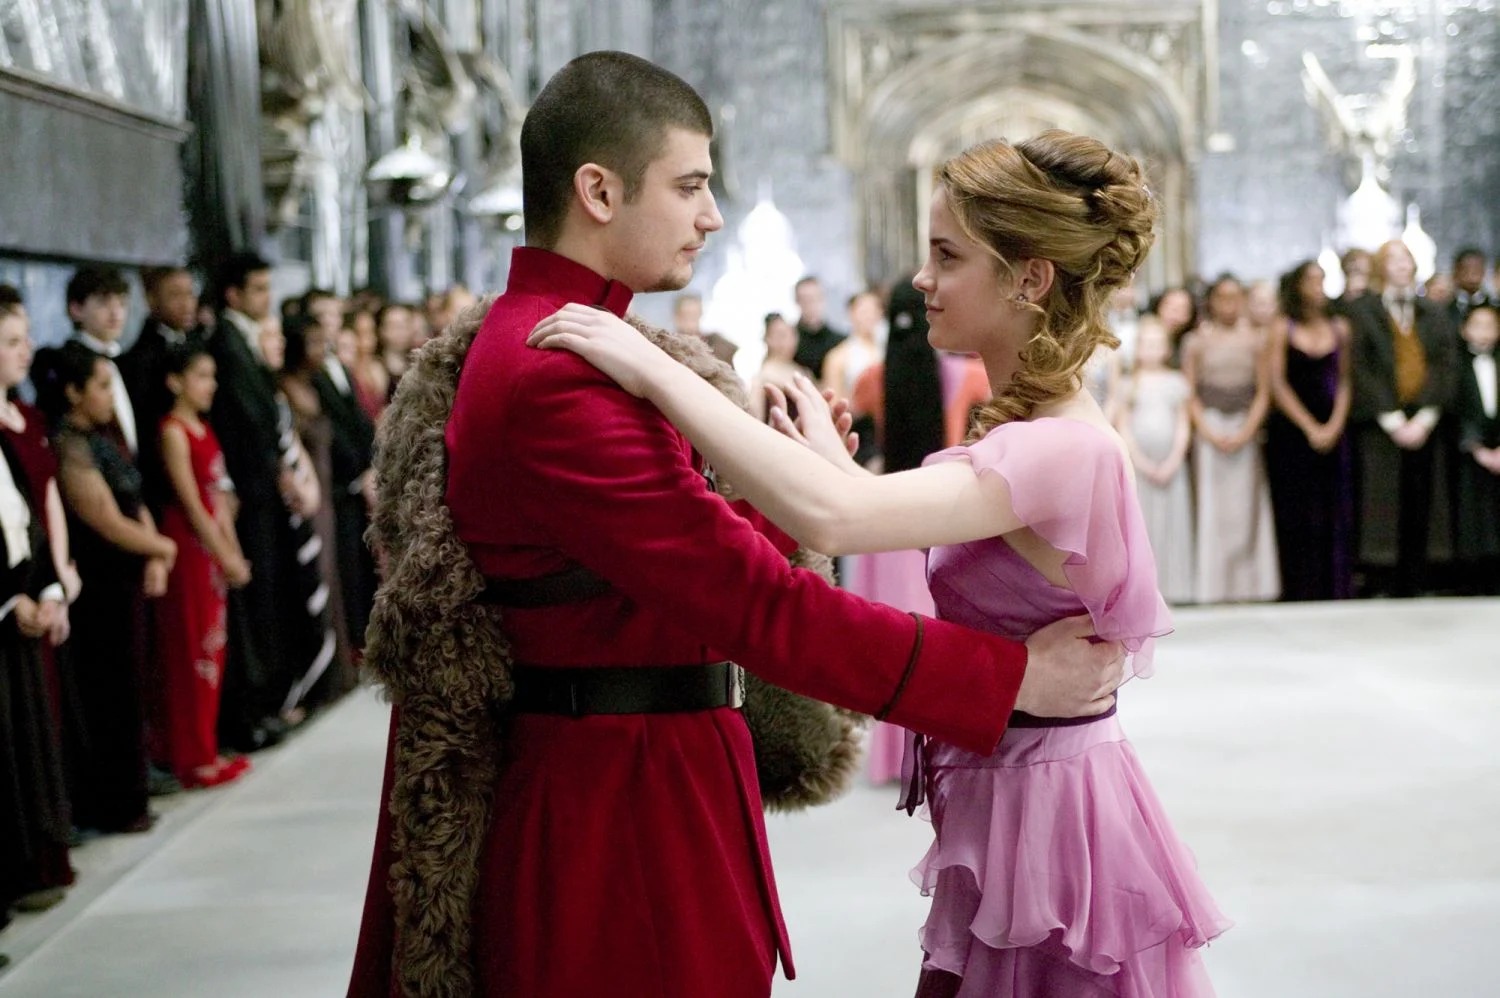 The Stunning And Magical Yule Ball Dress Hermione Wore In The Books Will Leave You Breathless!